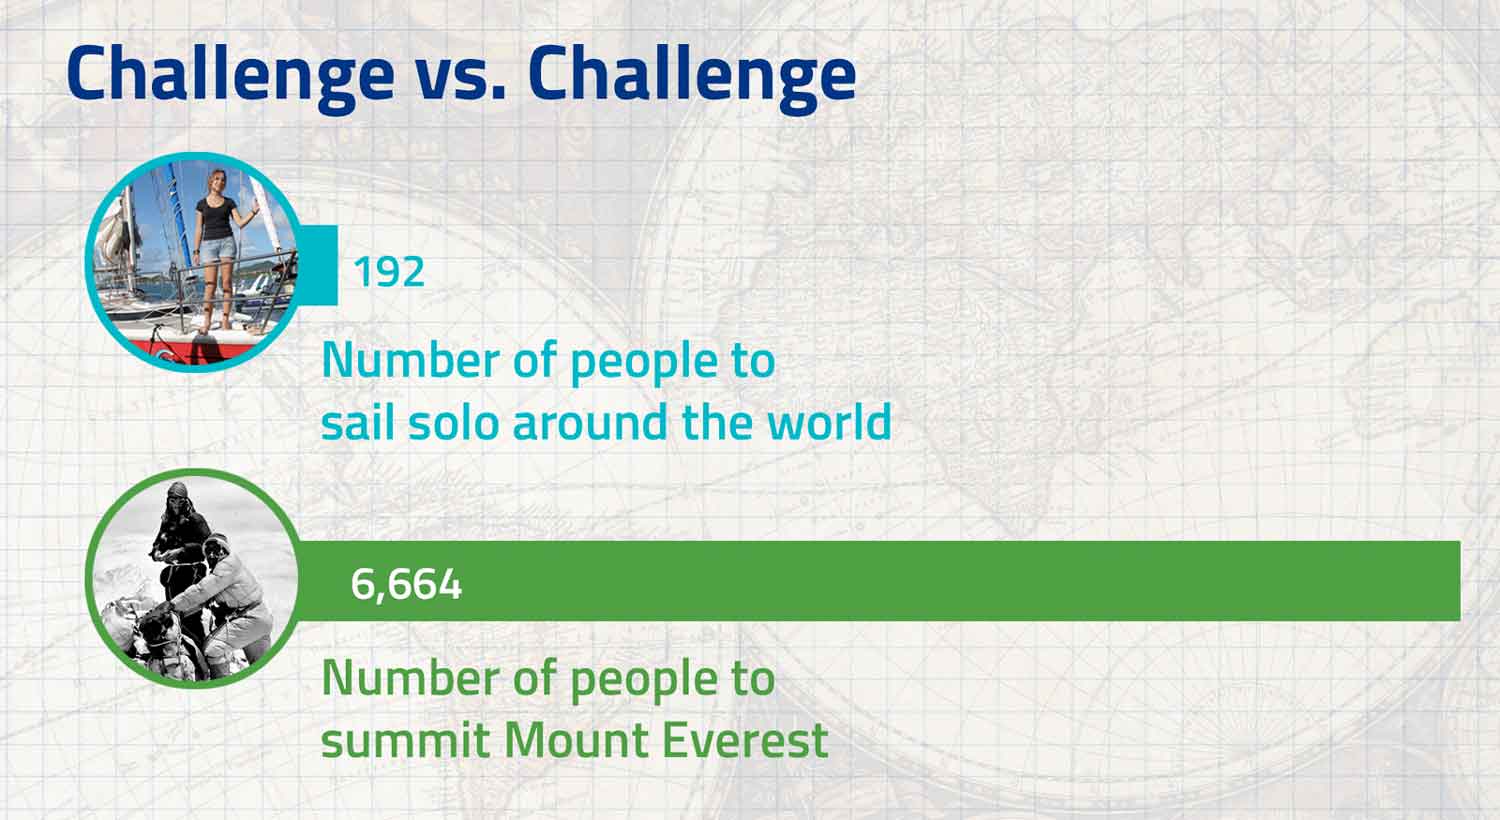 A graph showing that 192 people have sailed solo around the world while 6,664 people have summited Mount Everest.